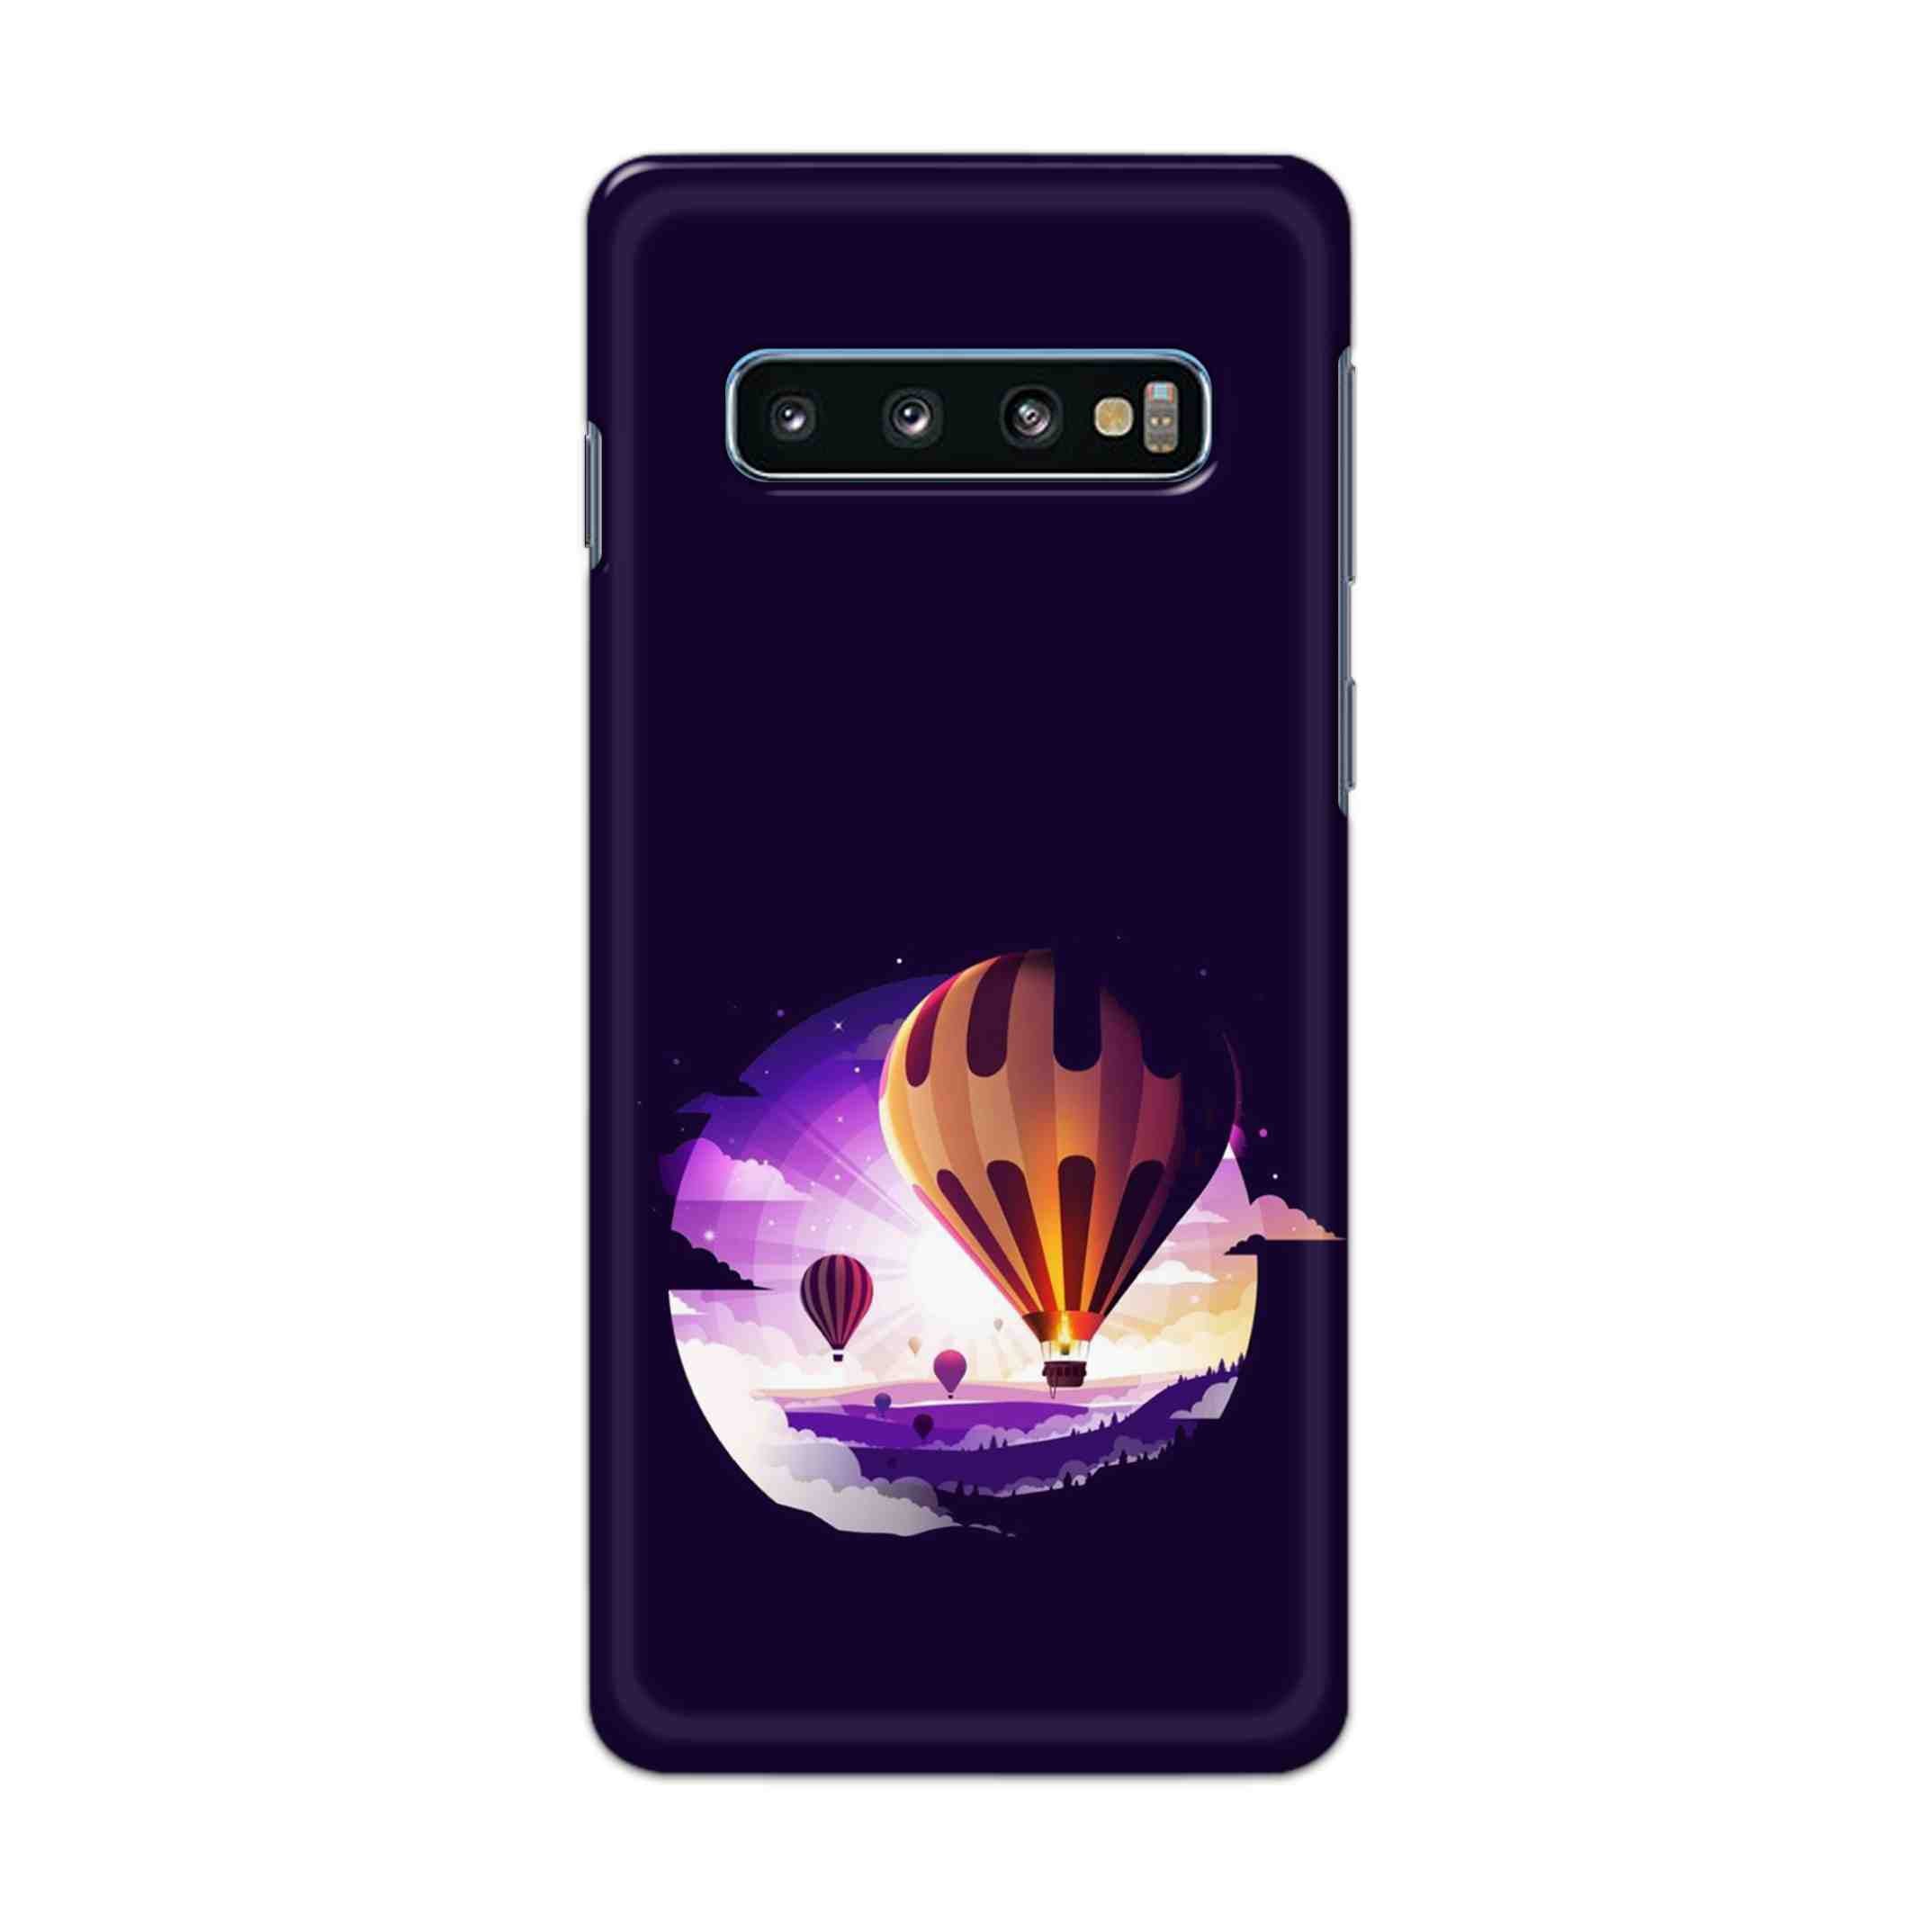 Buy Ballon Hard Back Mobile Phone Case Cover For Samsung Galaxy S10 Plus Online